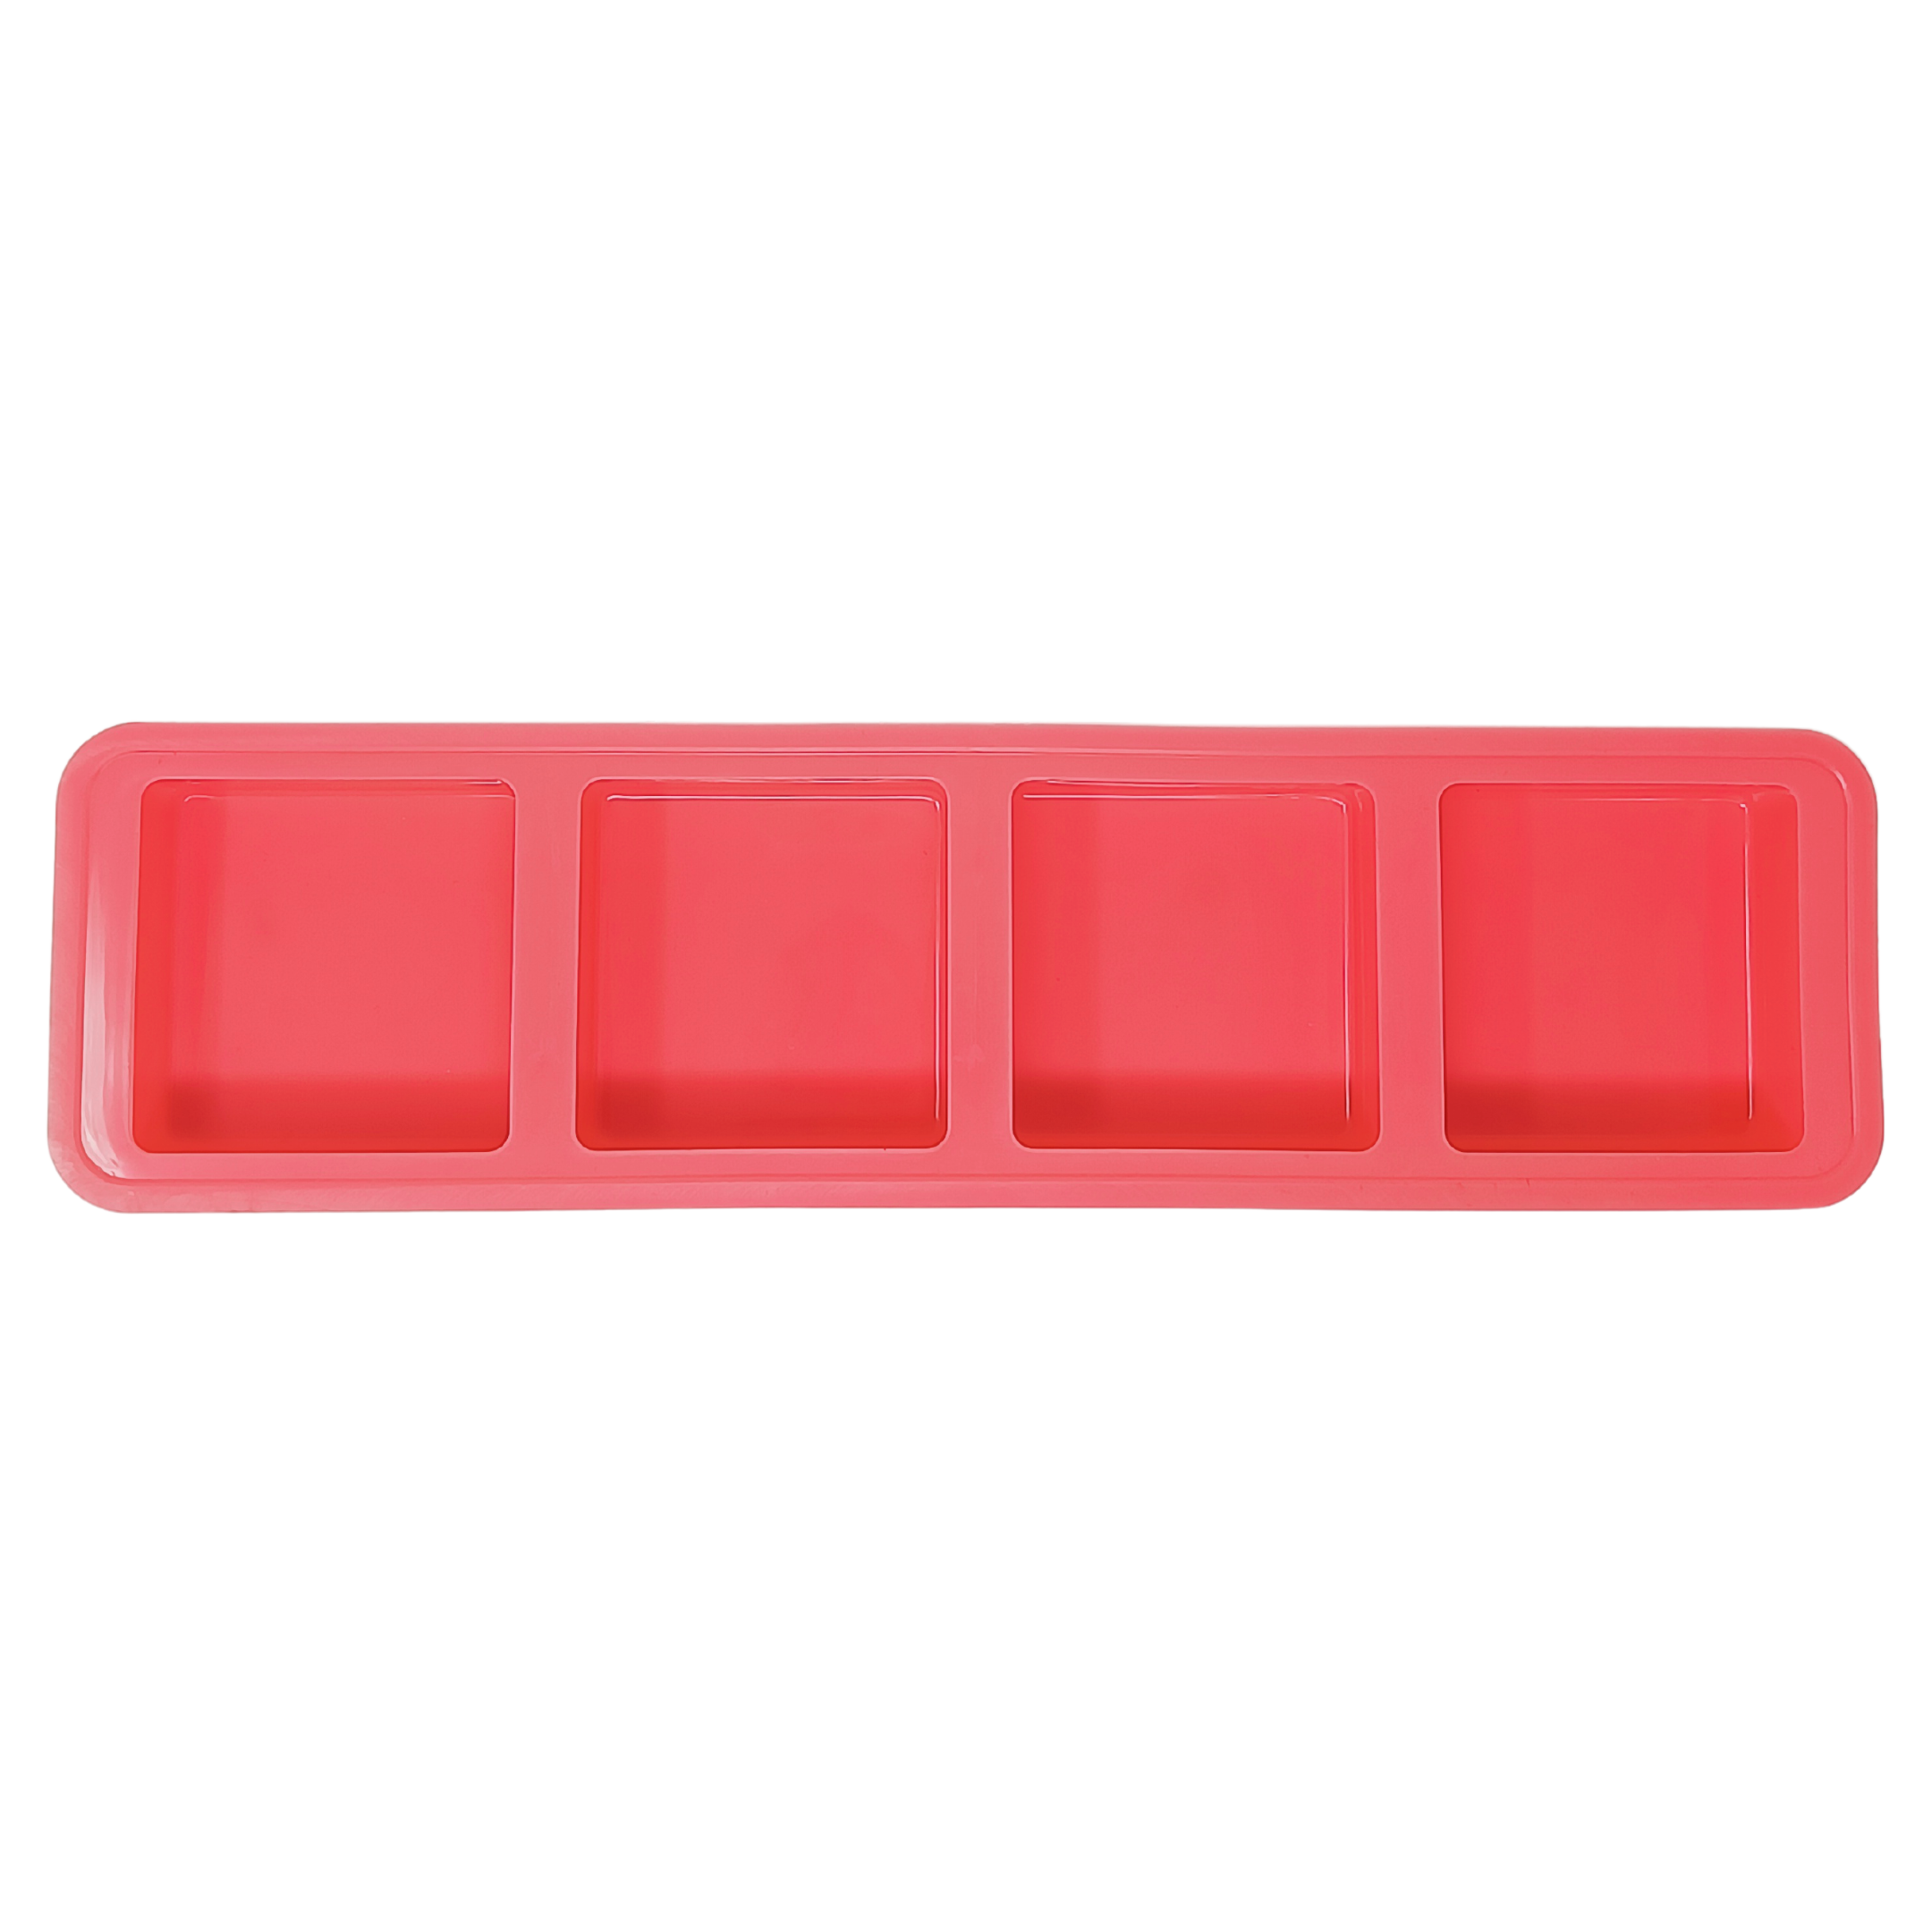 125ml Square Soap Mould - The Mould Story